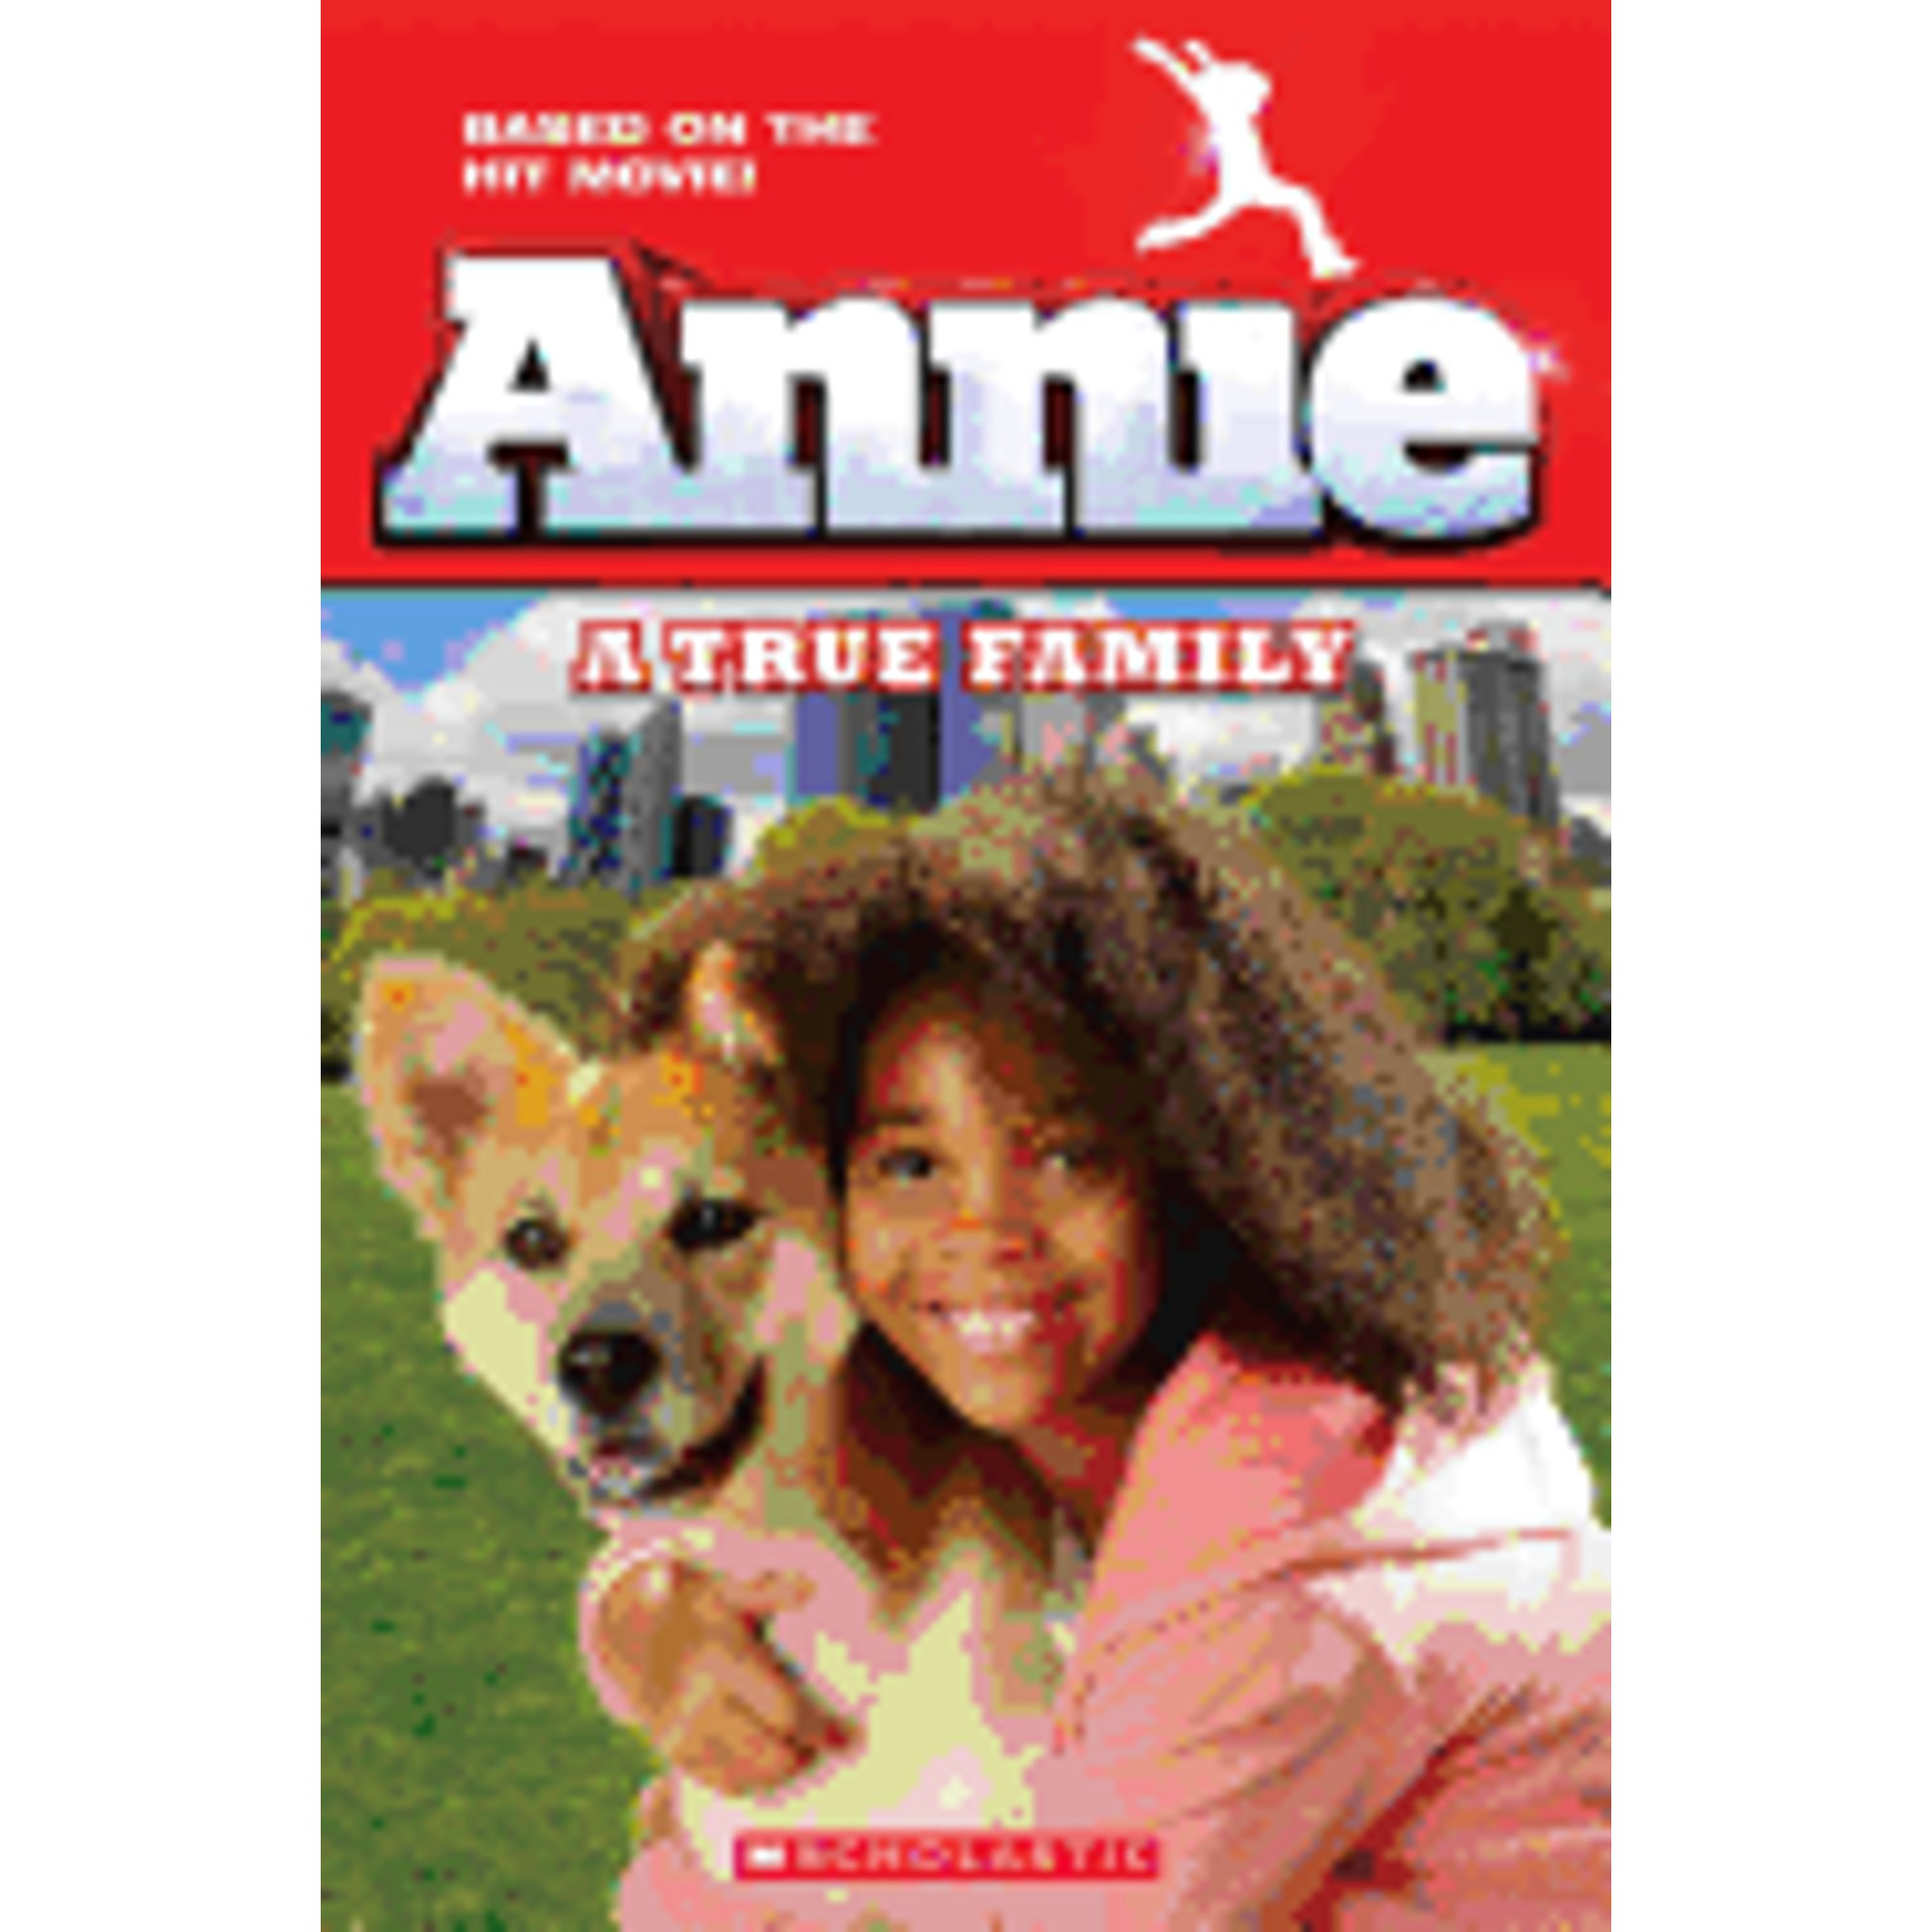 Annie: A True Family (Movie Tie-In) (Paperback) - image 1 of 2